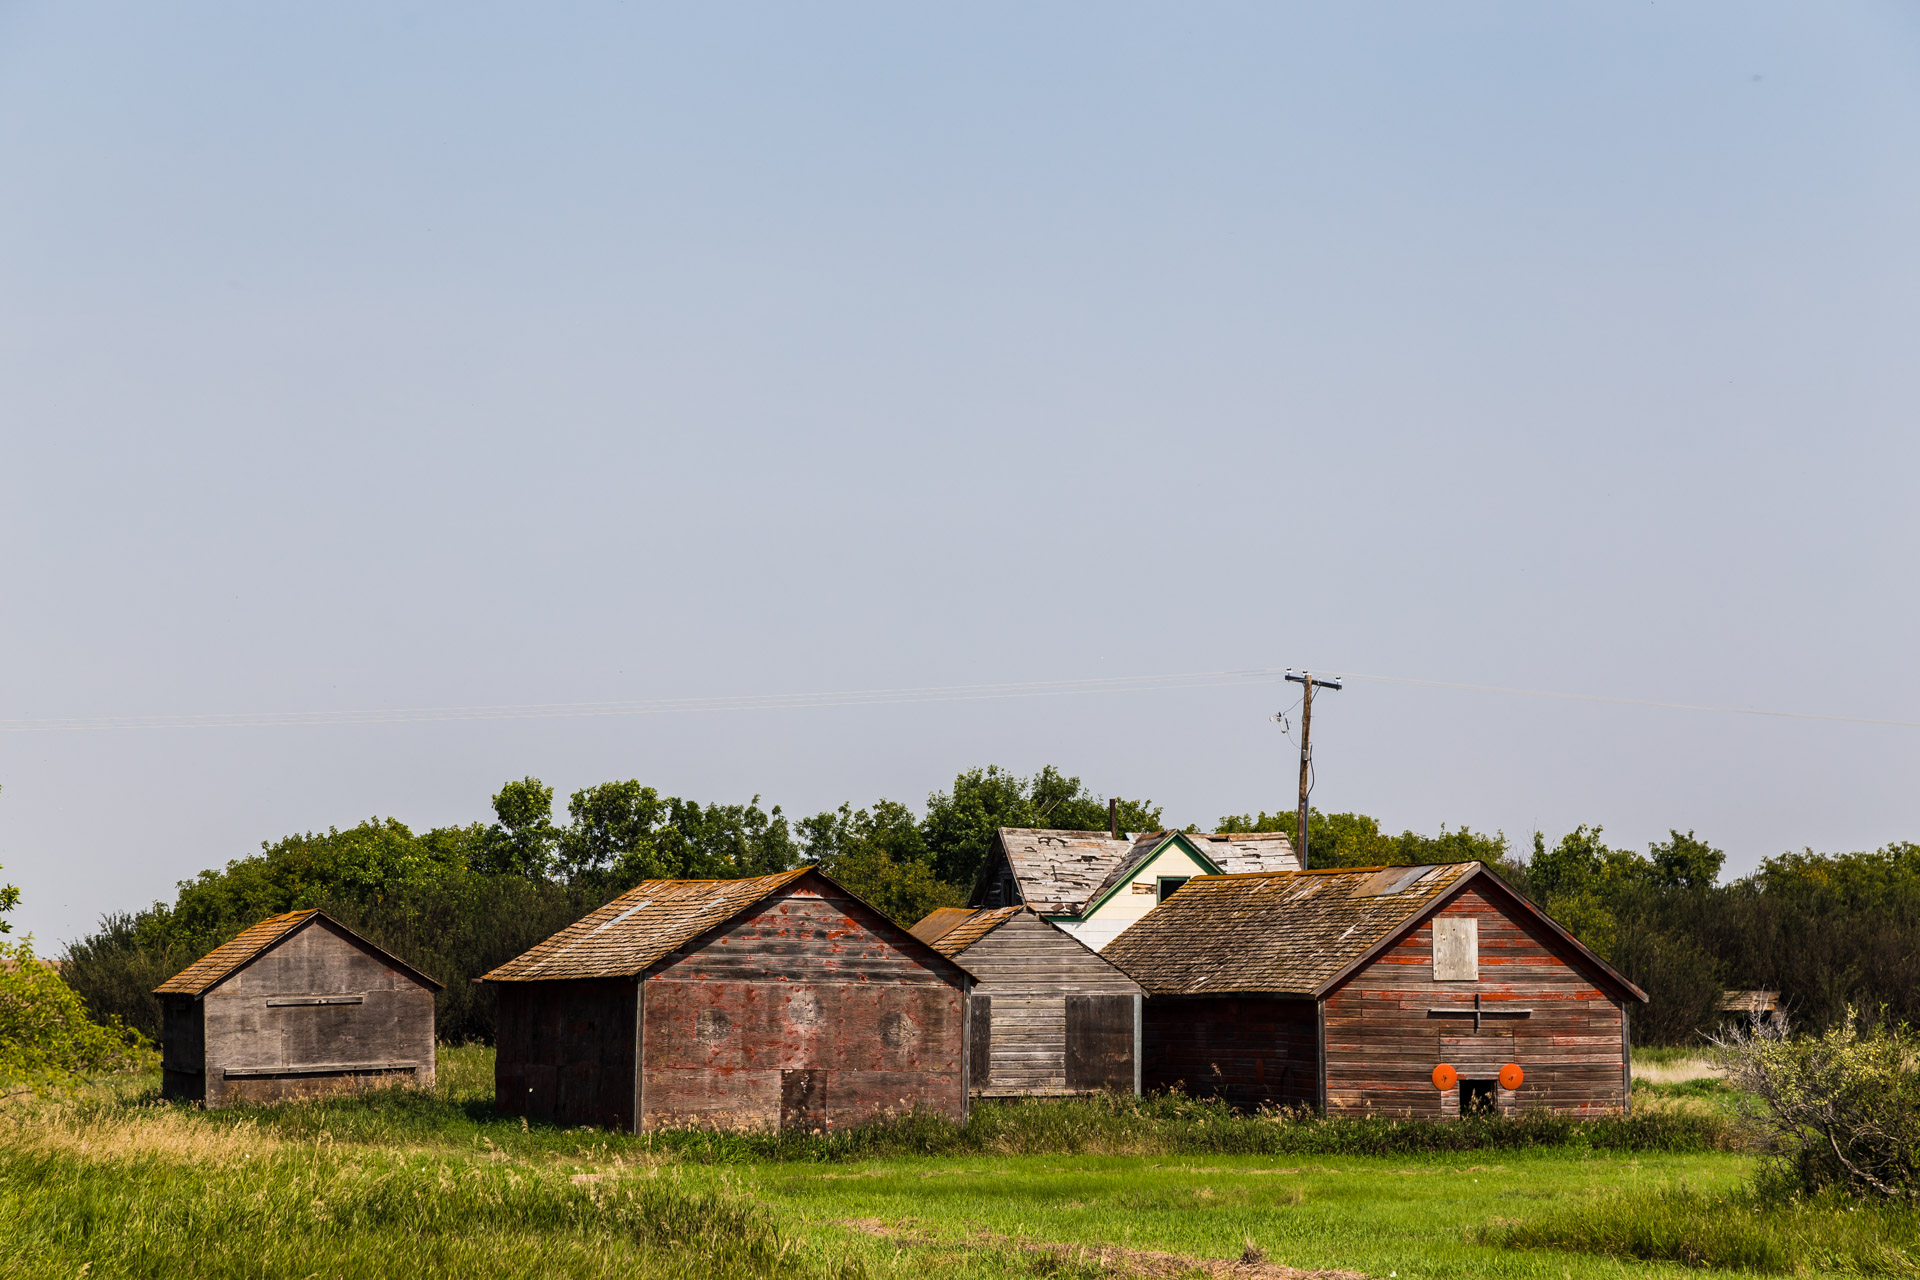 A Collection Of Barns (left angle mid)